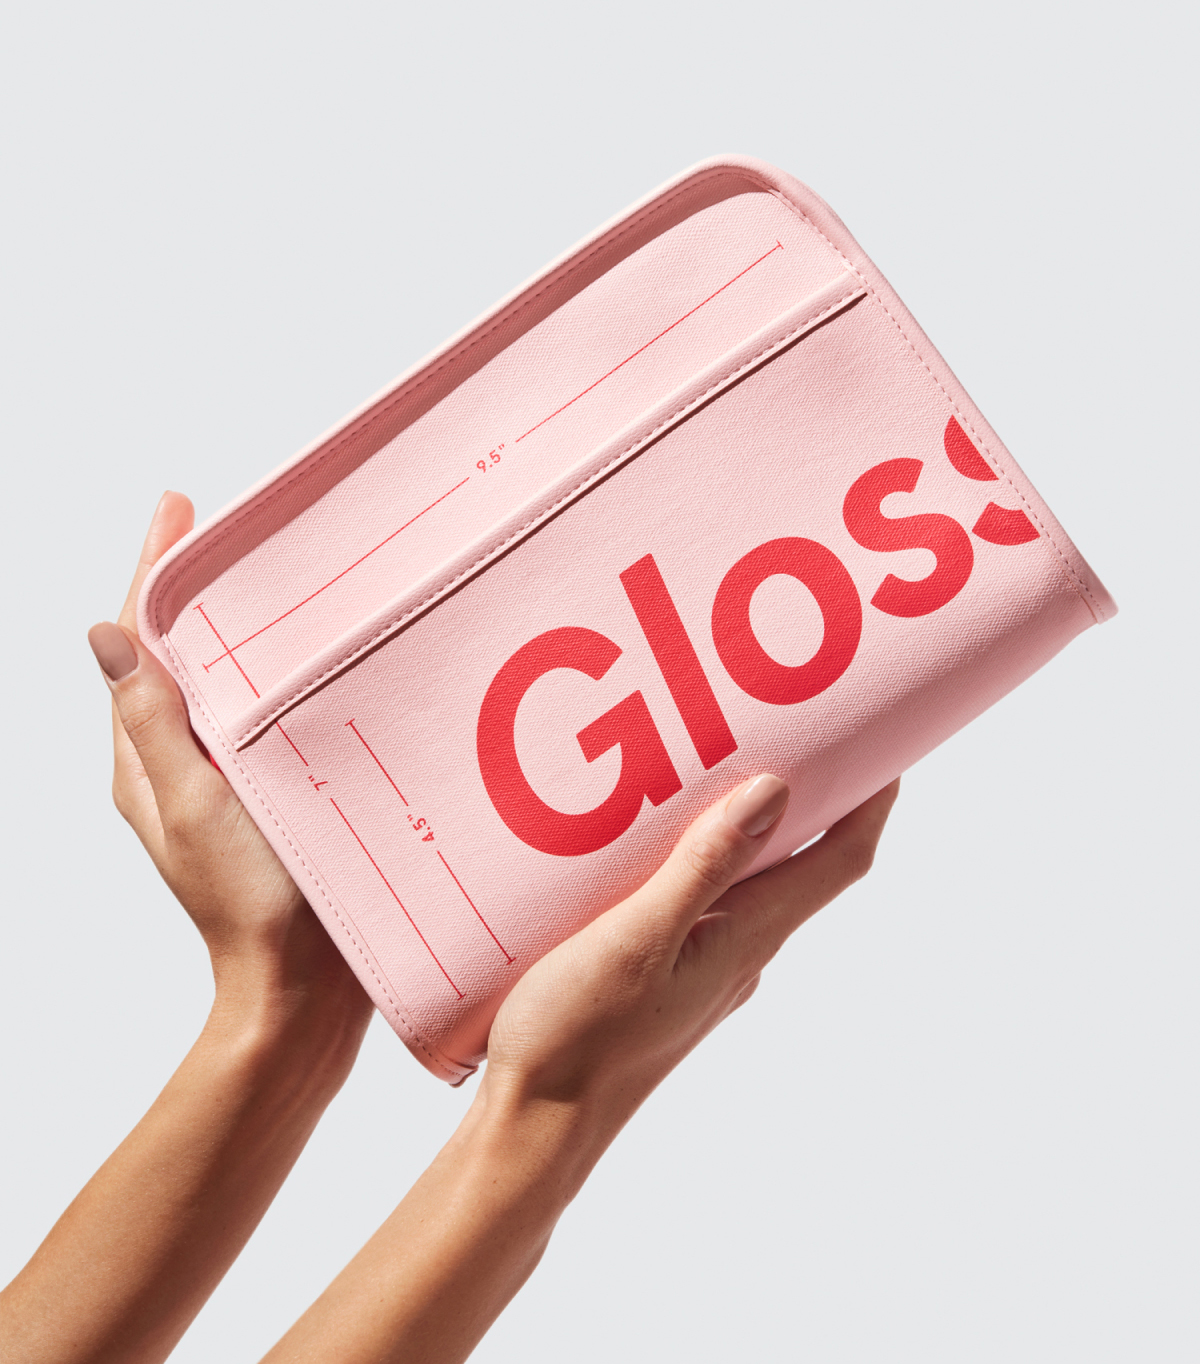 The best makeup bags you can buy